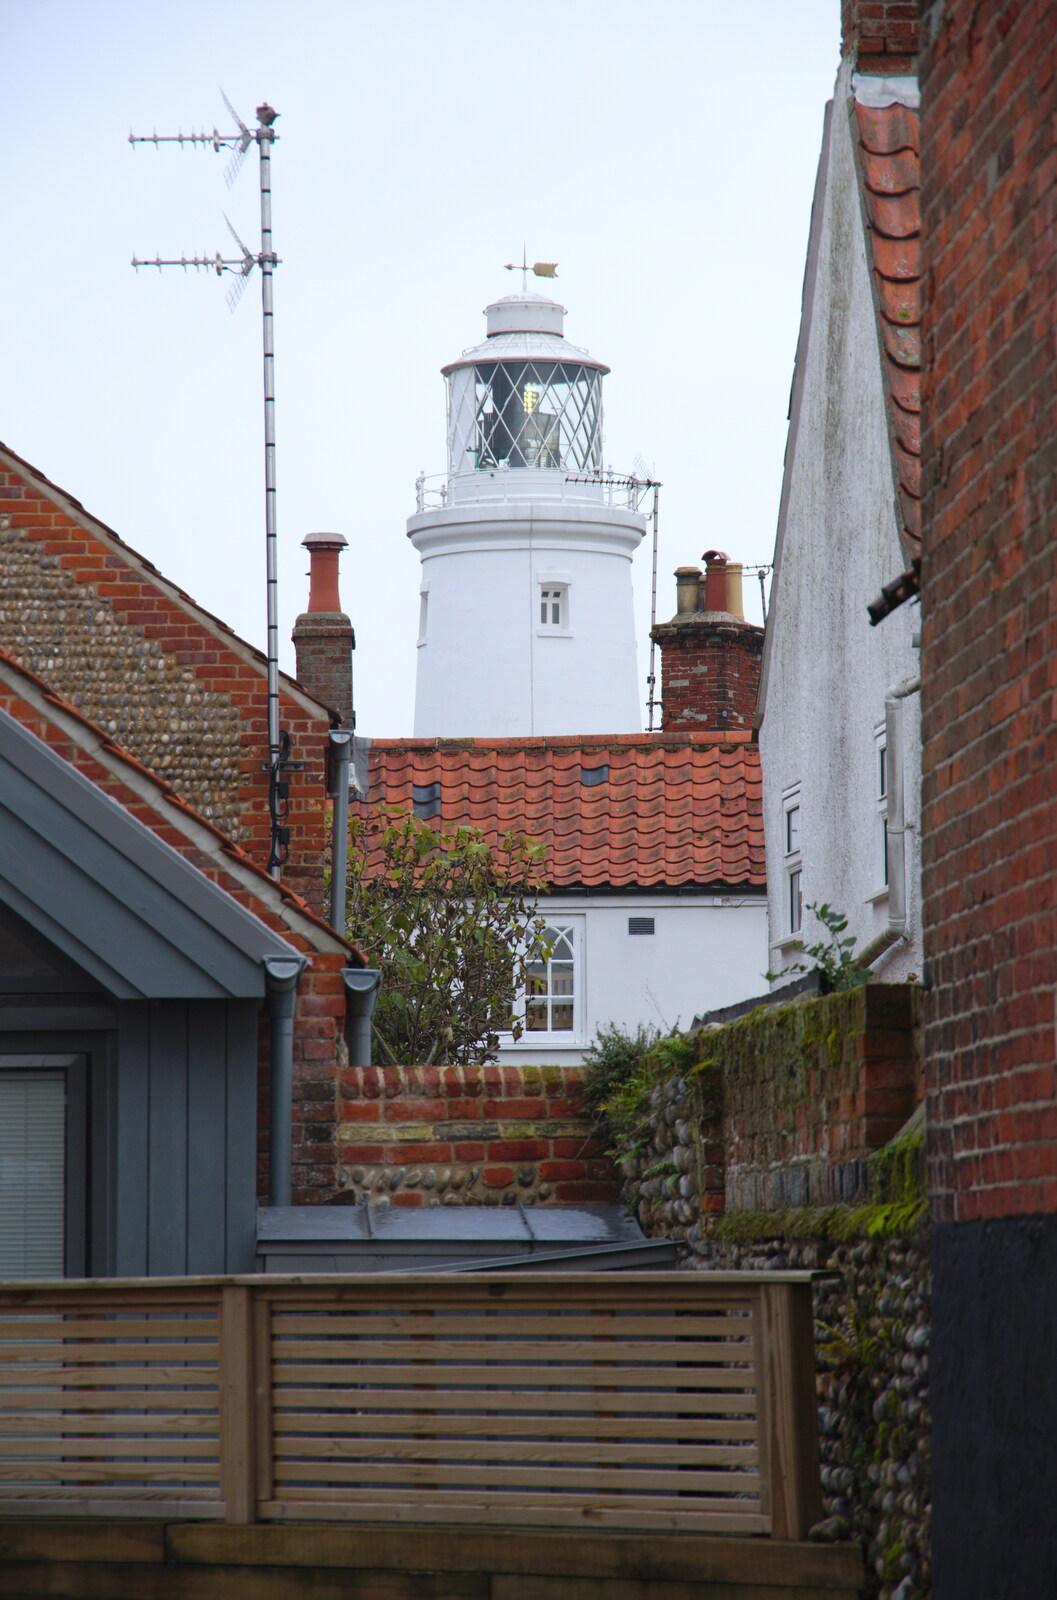 Another view of the lighthouse from A Night at the Crown Hotel, Southwold, Suffolk - 8th November 2019